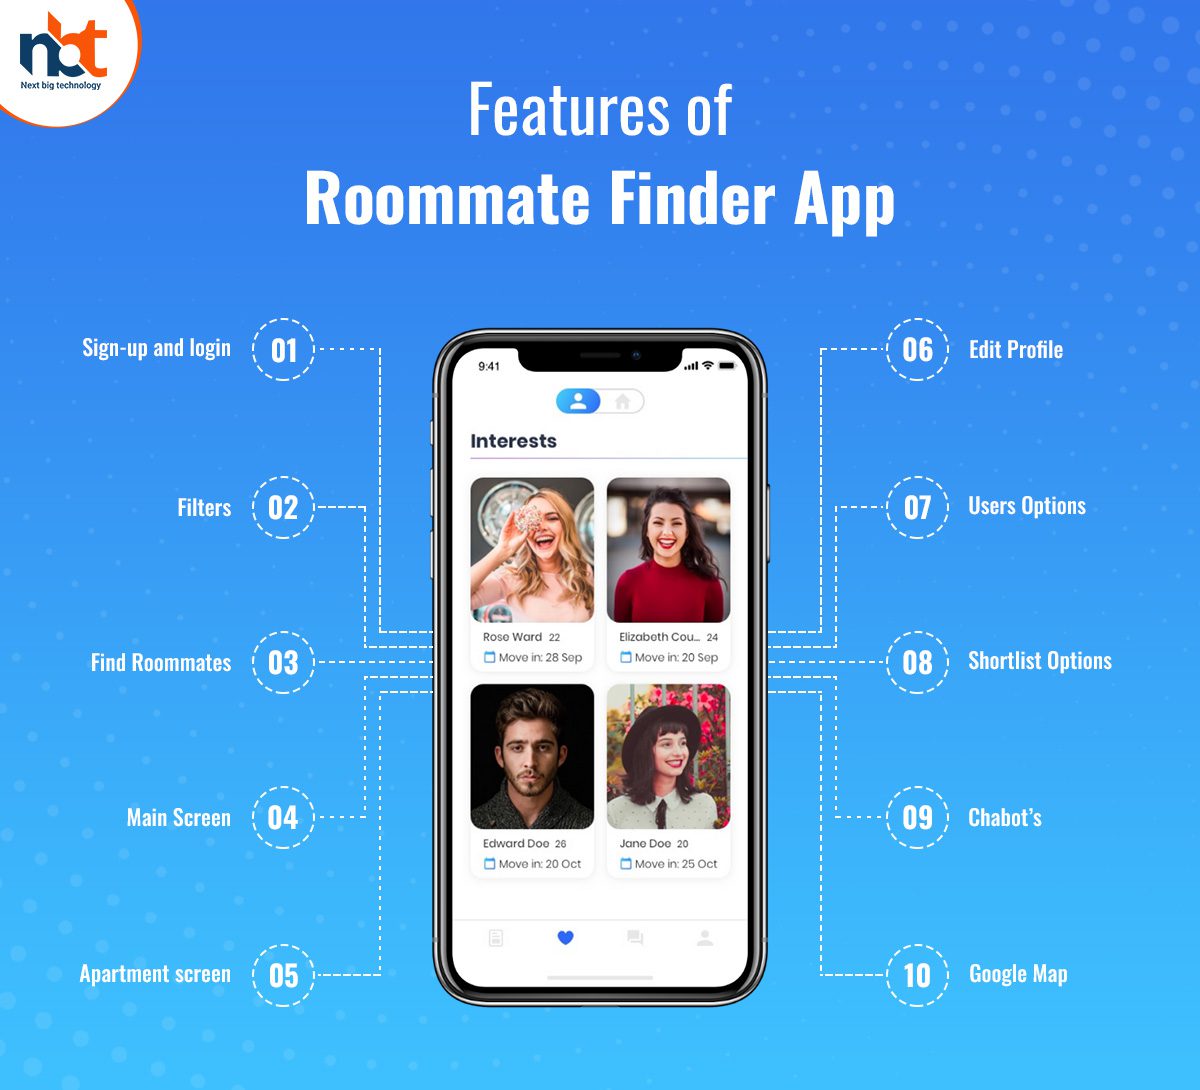 Features of Roommate Finder App